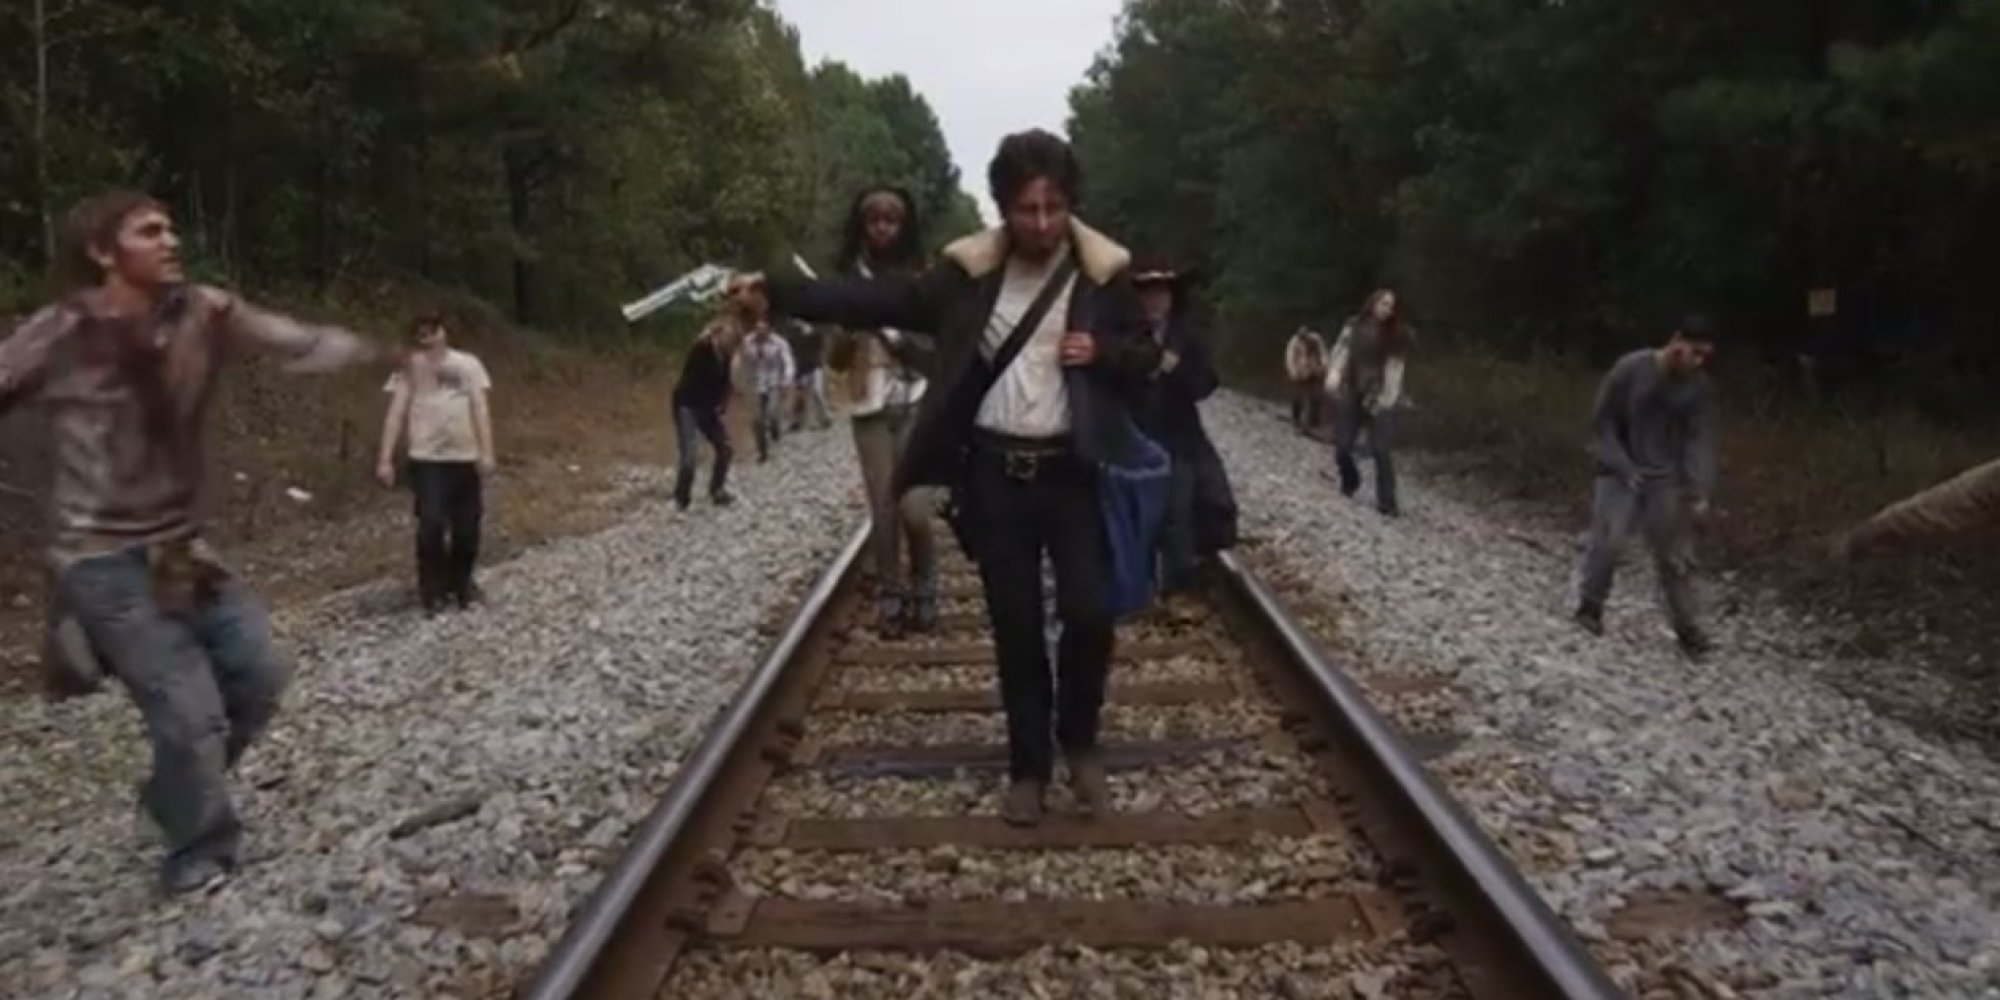 This 'Walking Dead' Music Video Set To 'Another One Bites The Dust' Is ...